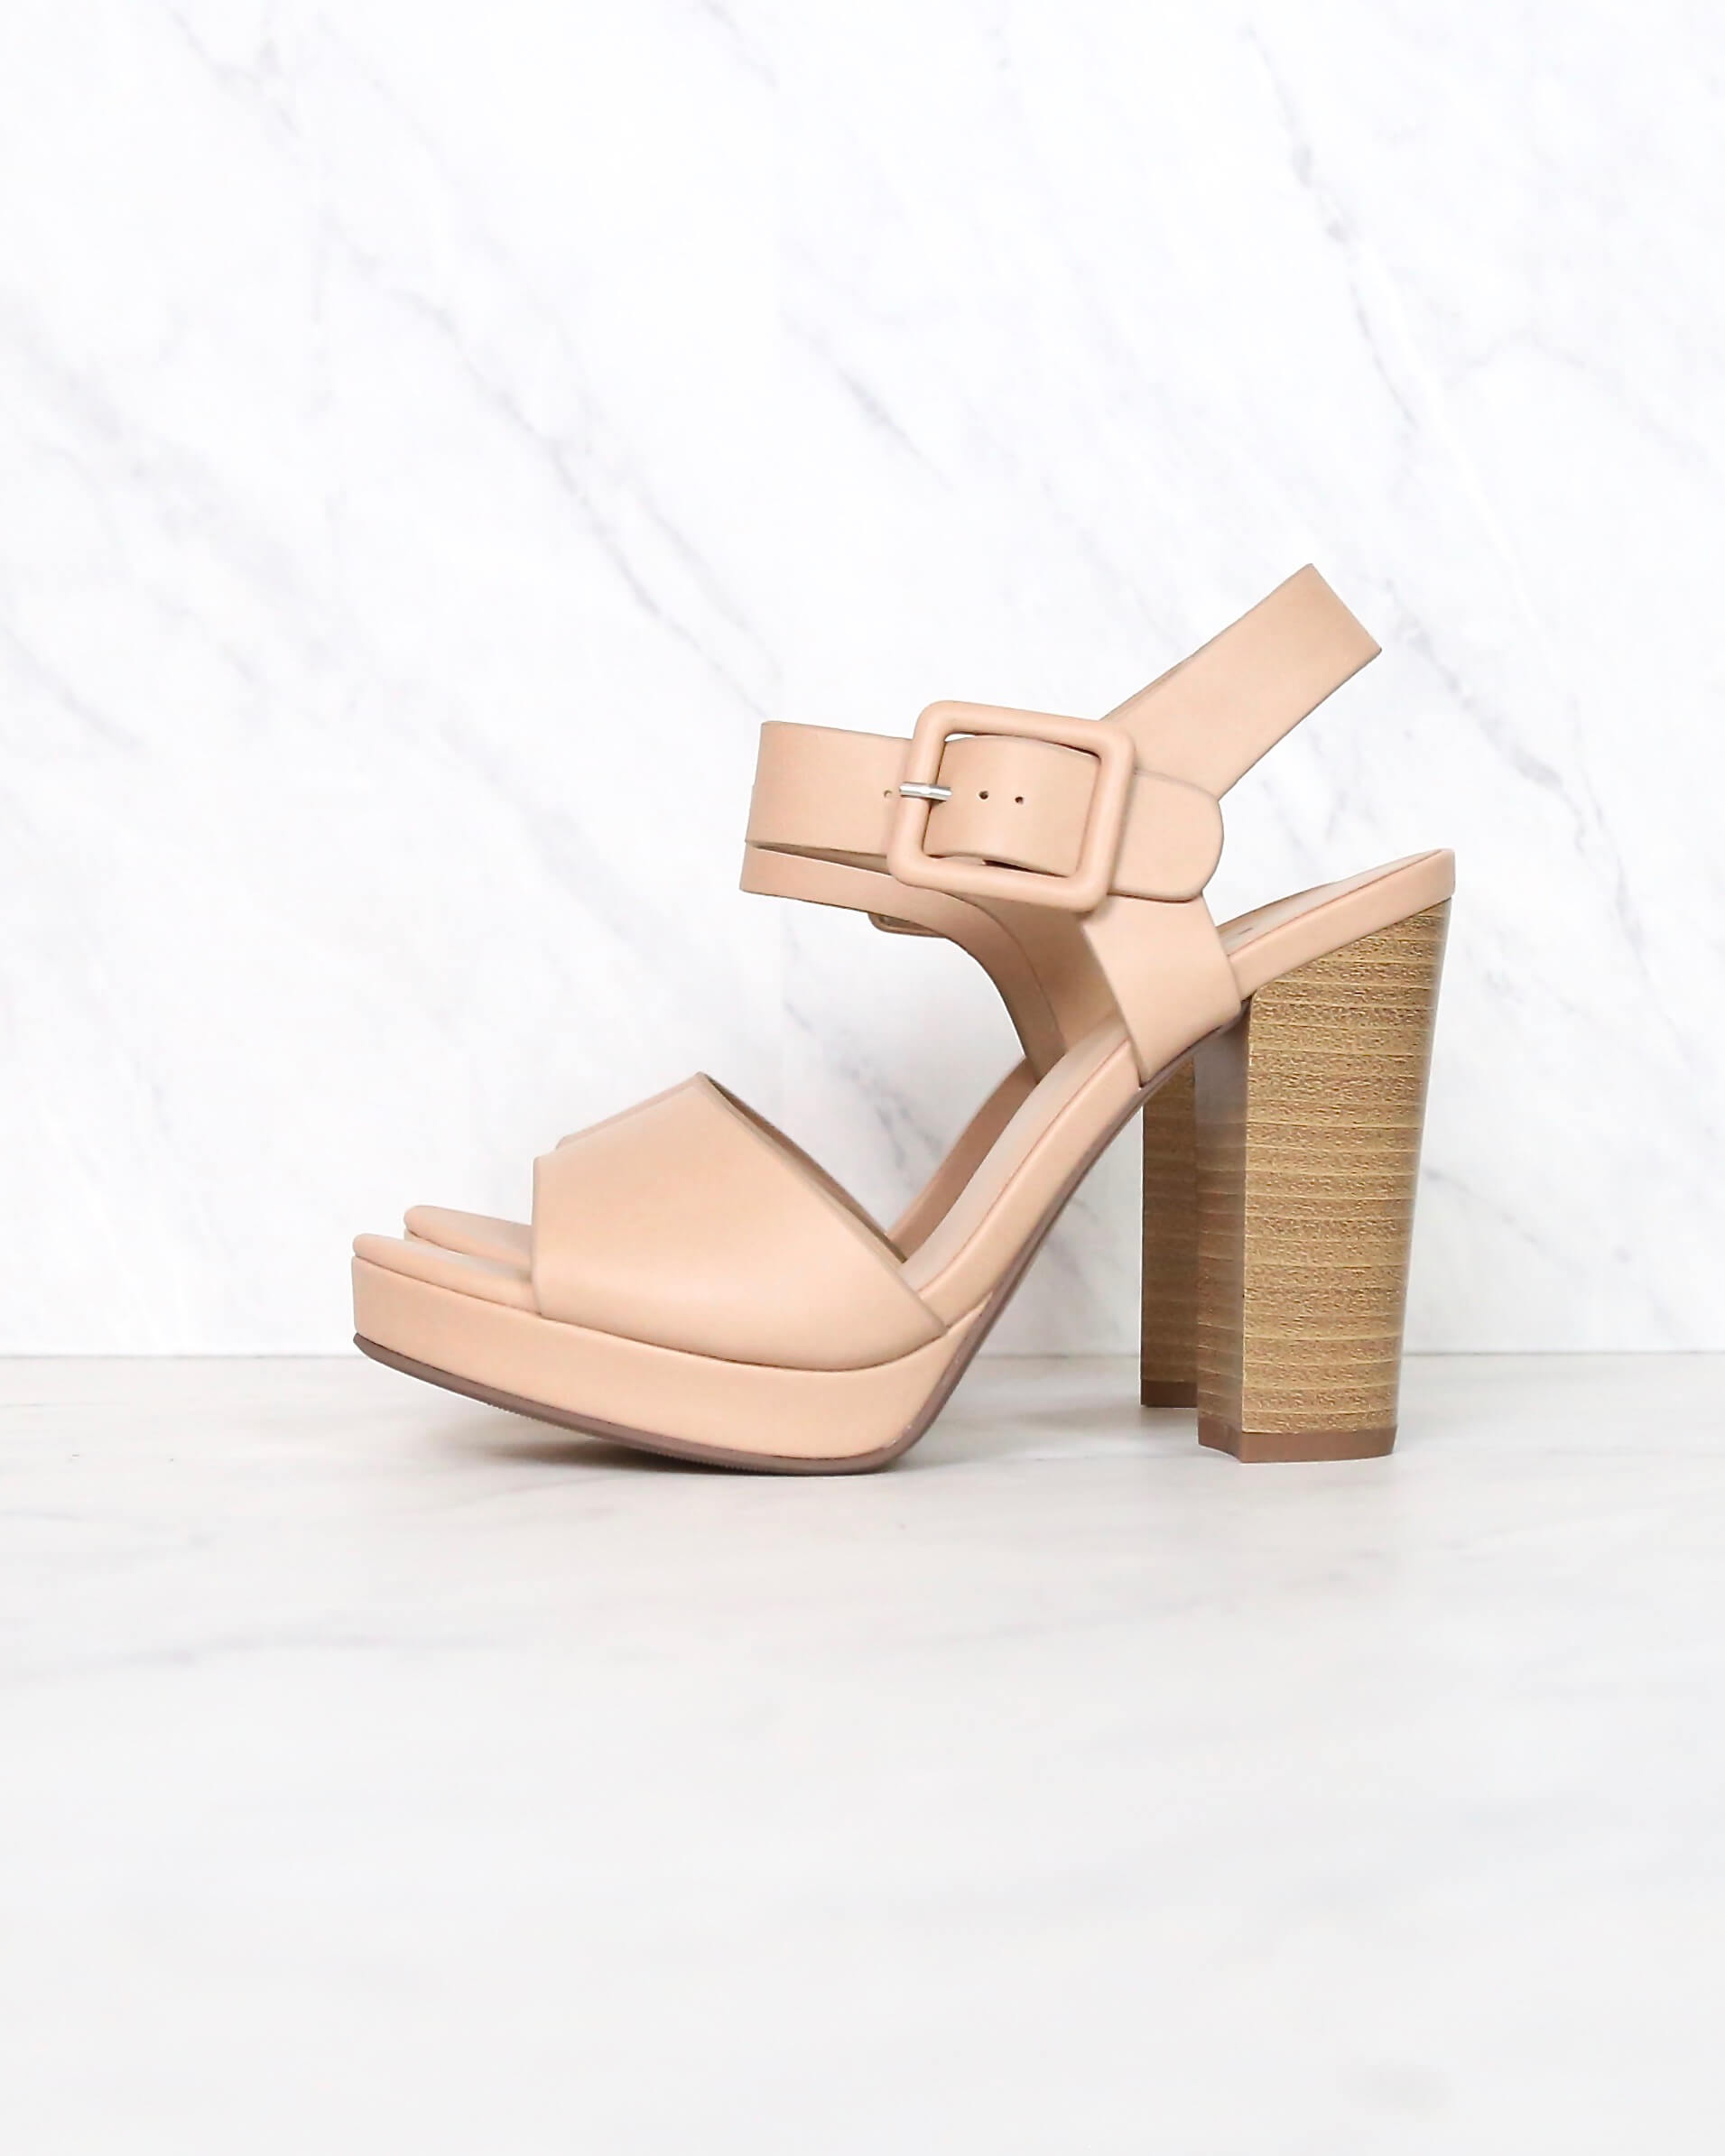 Buckle Up! Ankle Strapped High Heels in Dusty Mauve – Shop Hearts